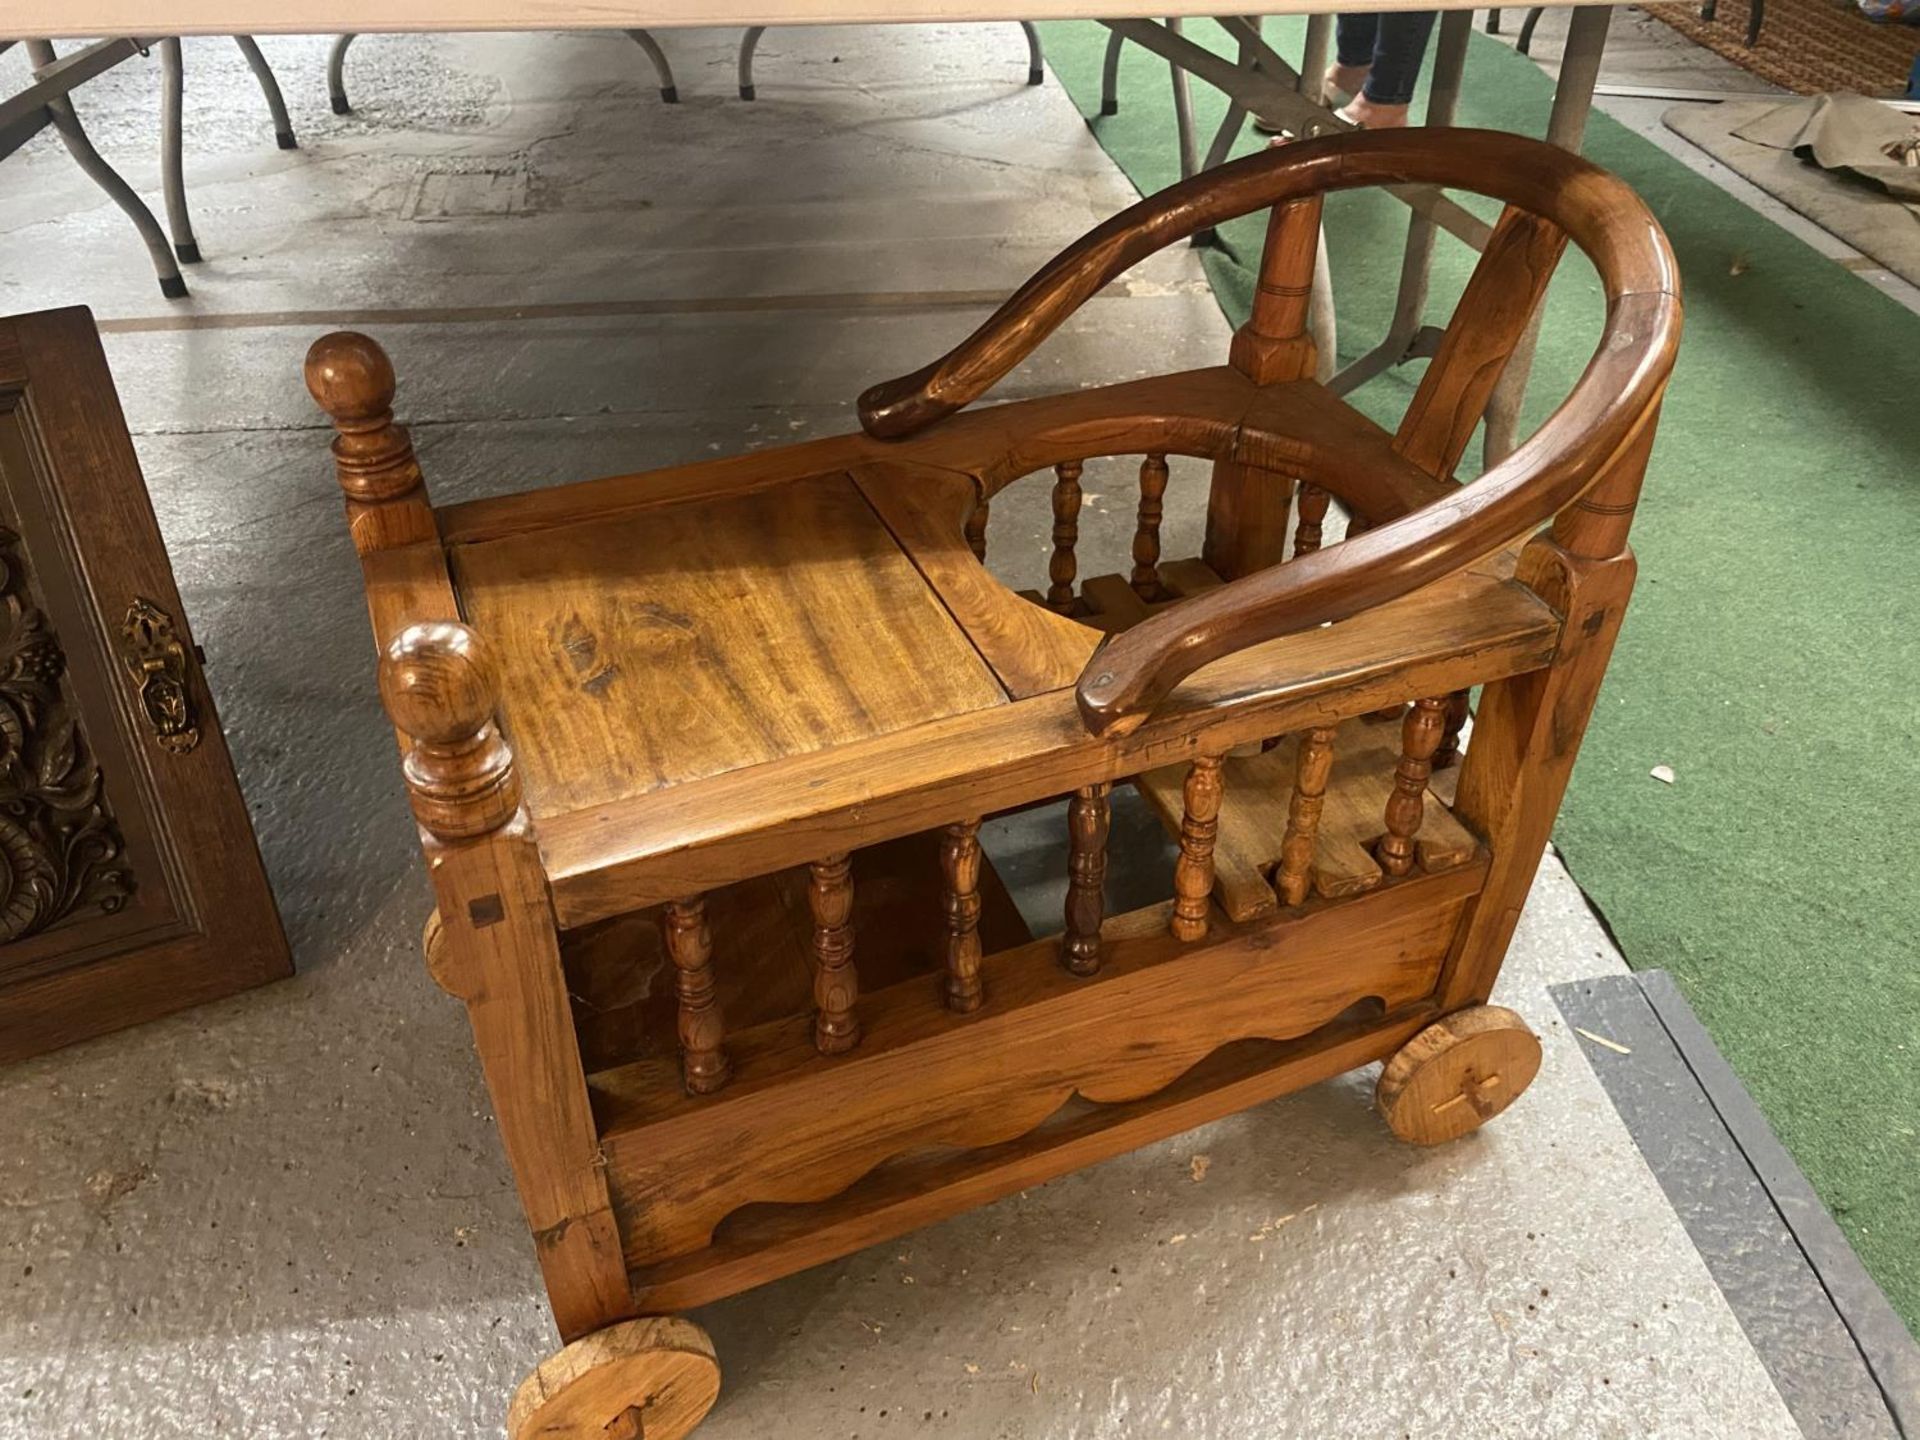 A EARLY MANCHURIAN HARDWOOD CHILD'S CHAIR